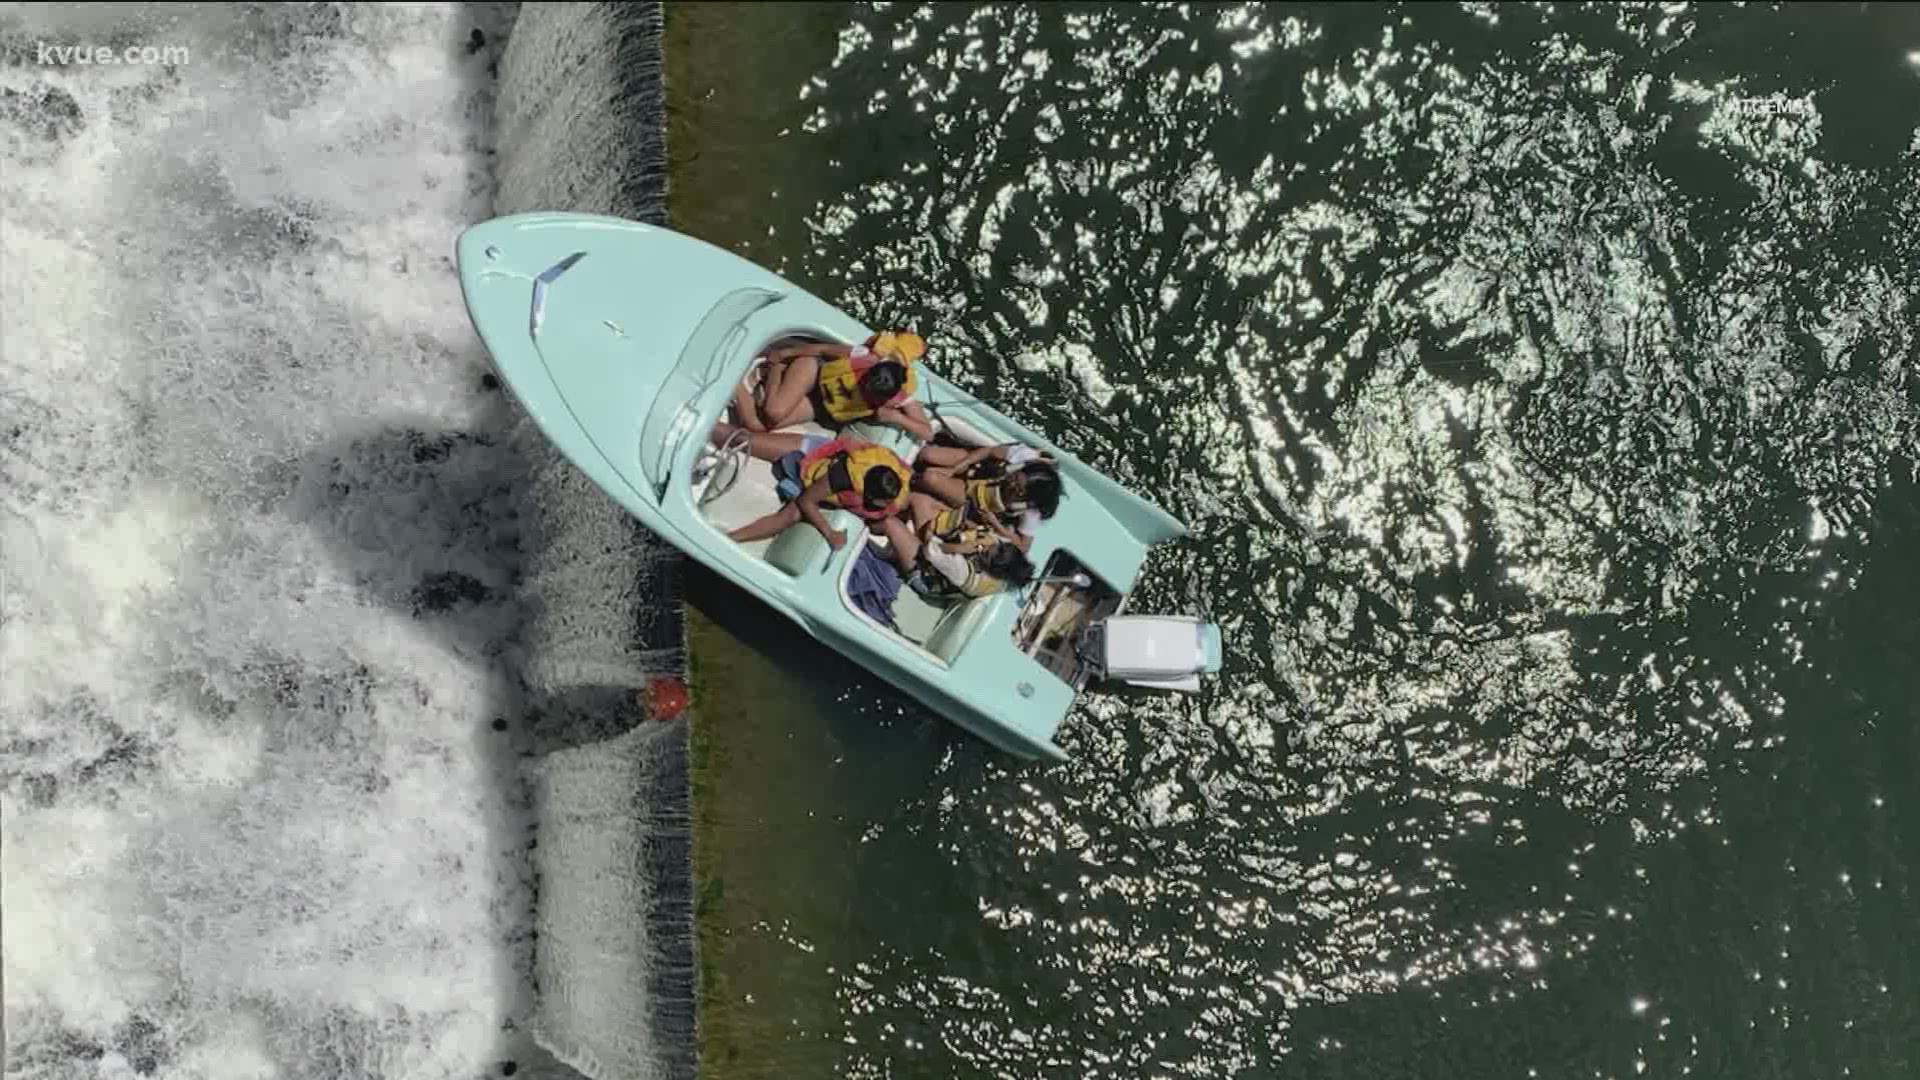 It was a close call for a boat on the Colorado River. Video shows the boat was very close to going over Longhorn Dam before the boaters were rescued.